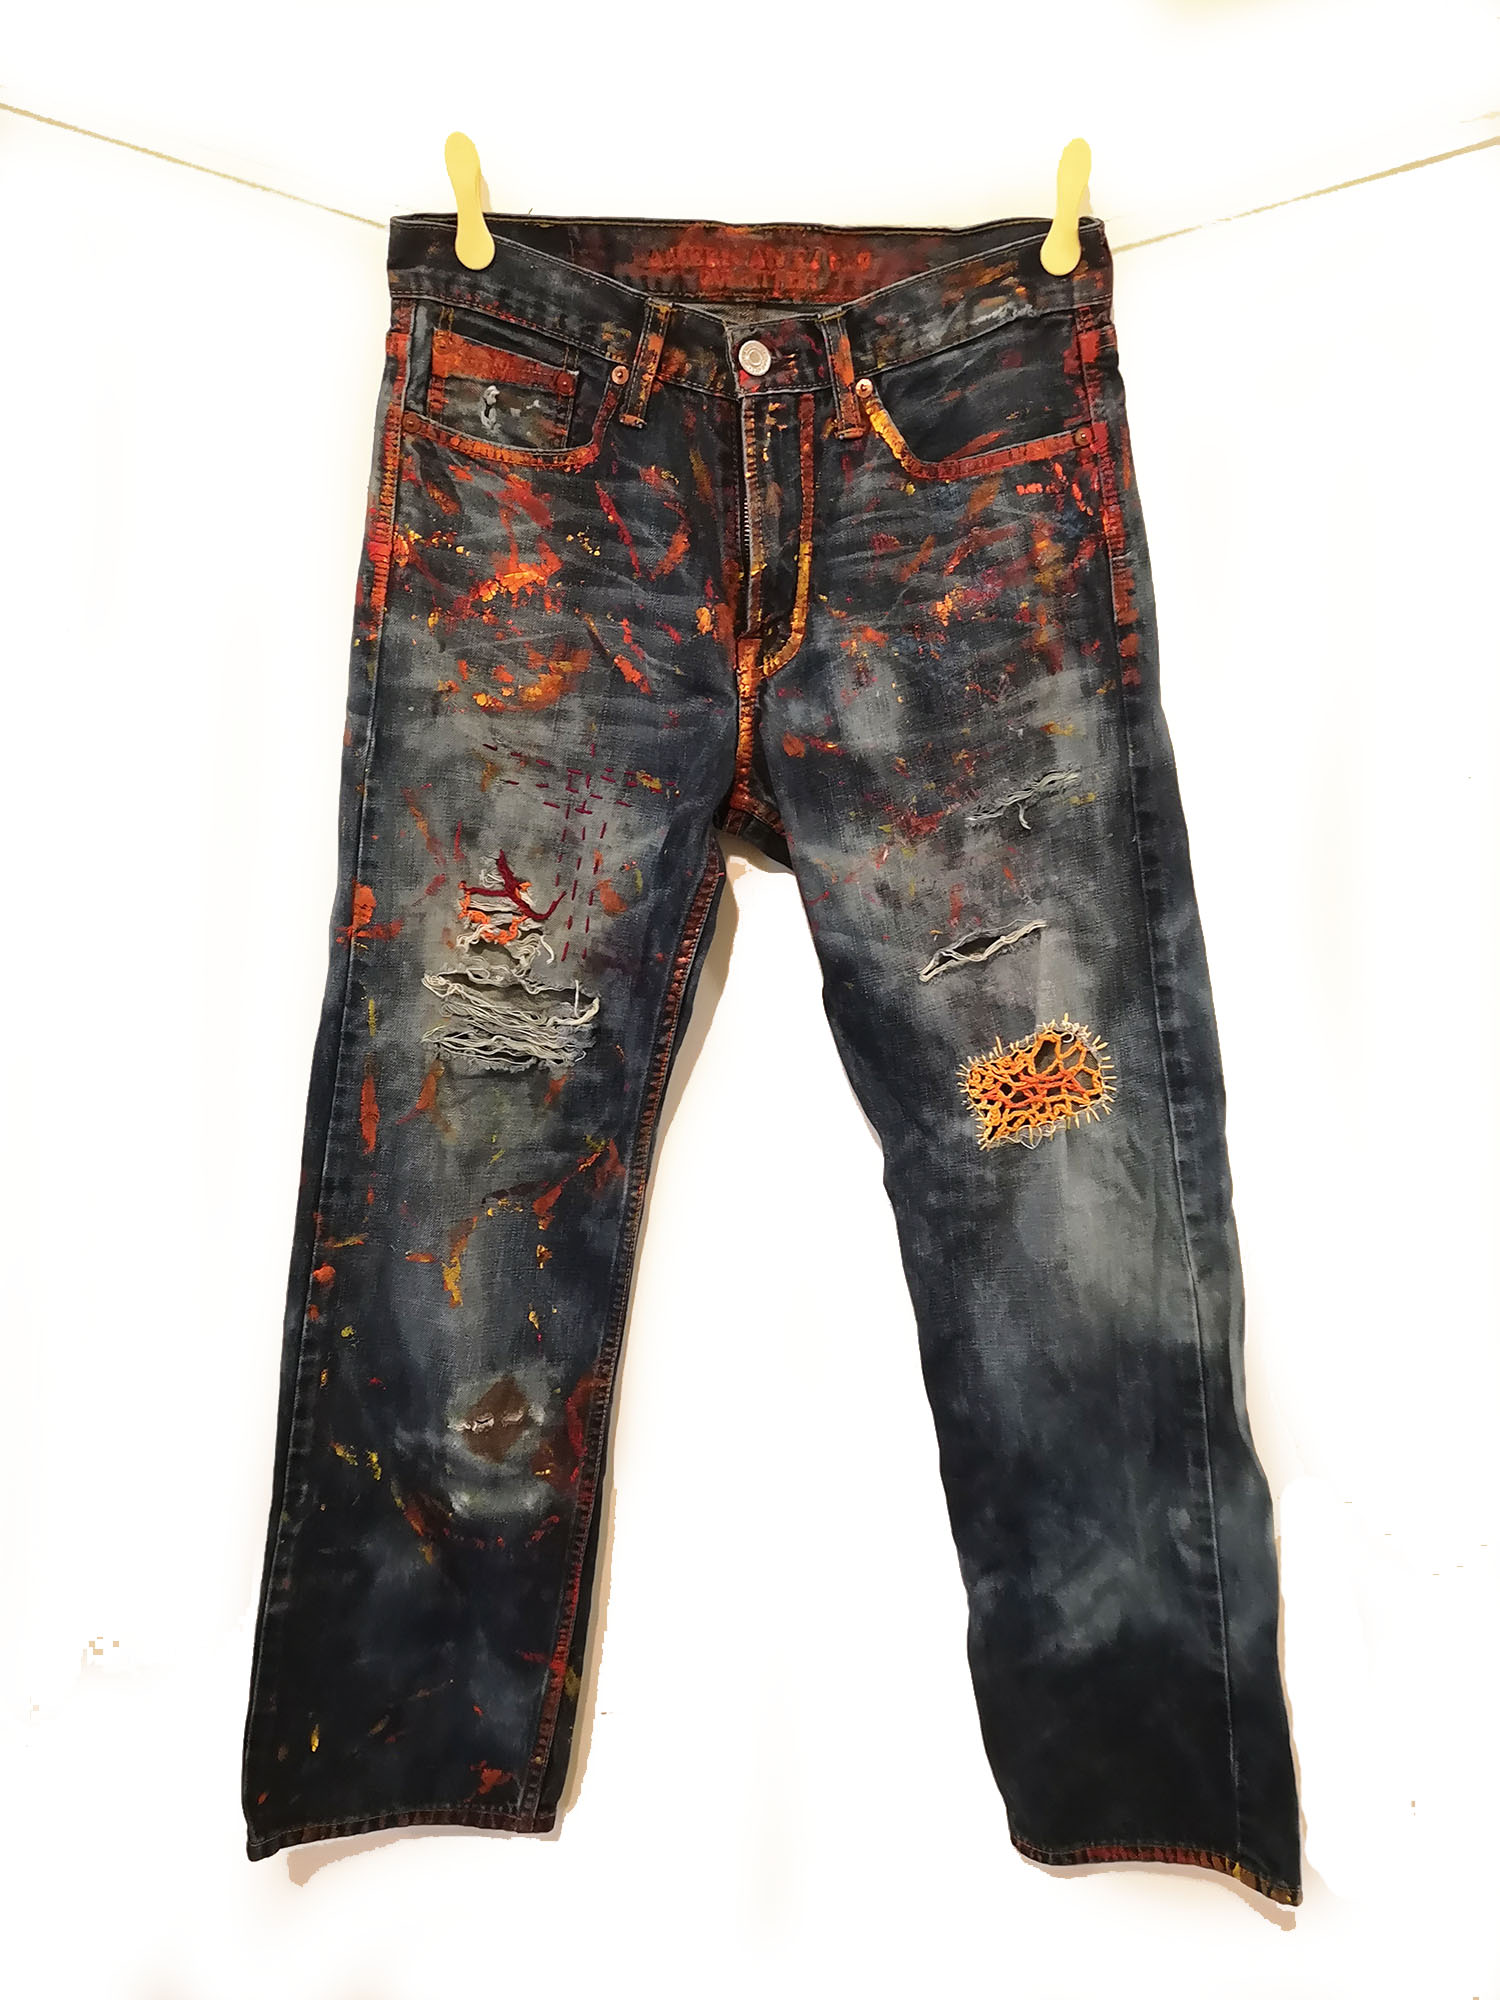 https://www.rebeccabessette.com/wp-content/uploads/2019/09/hand-painted-jeans-denim-vintage-abstract-splatter-art-patched-embroidery-rebecca-bessette-1-1.jpg